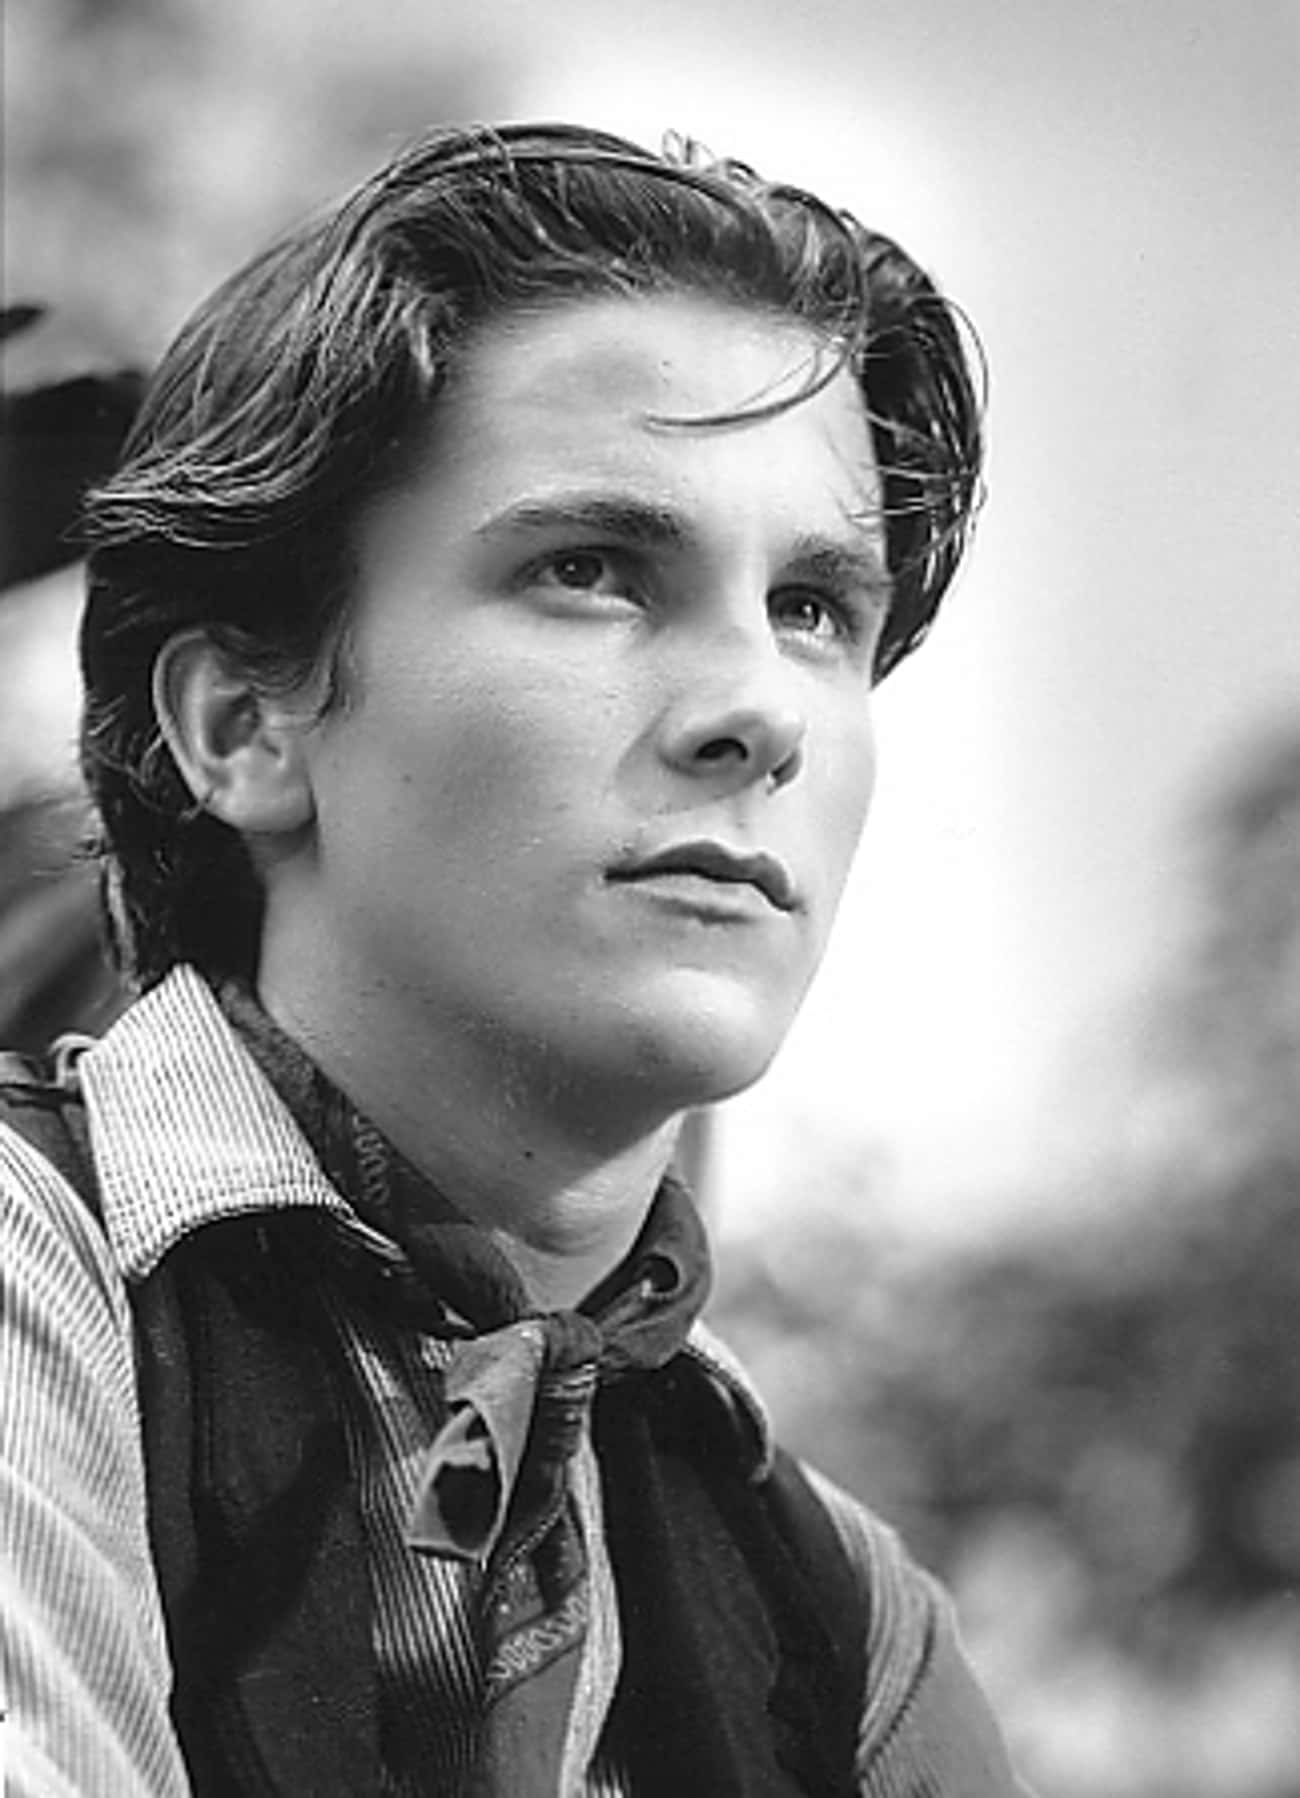 Young Christian Bale as Teenage Actor